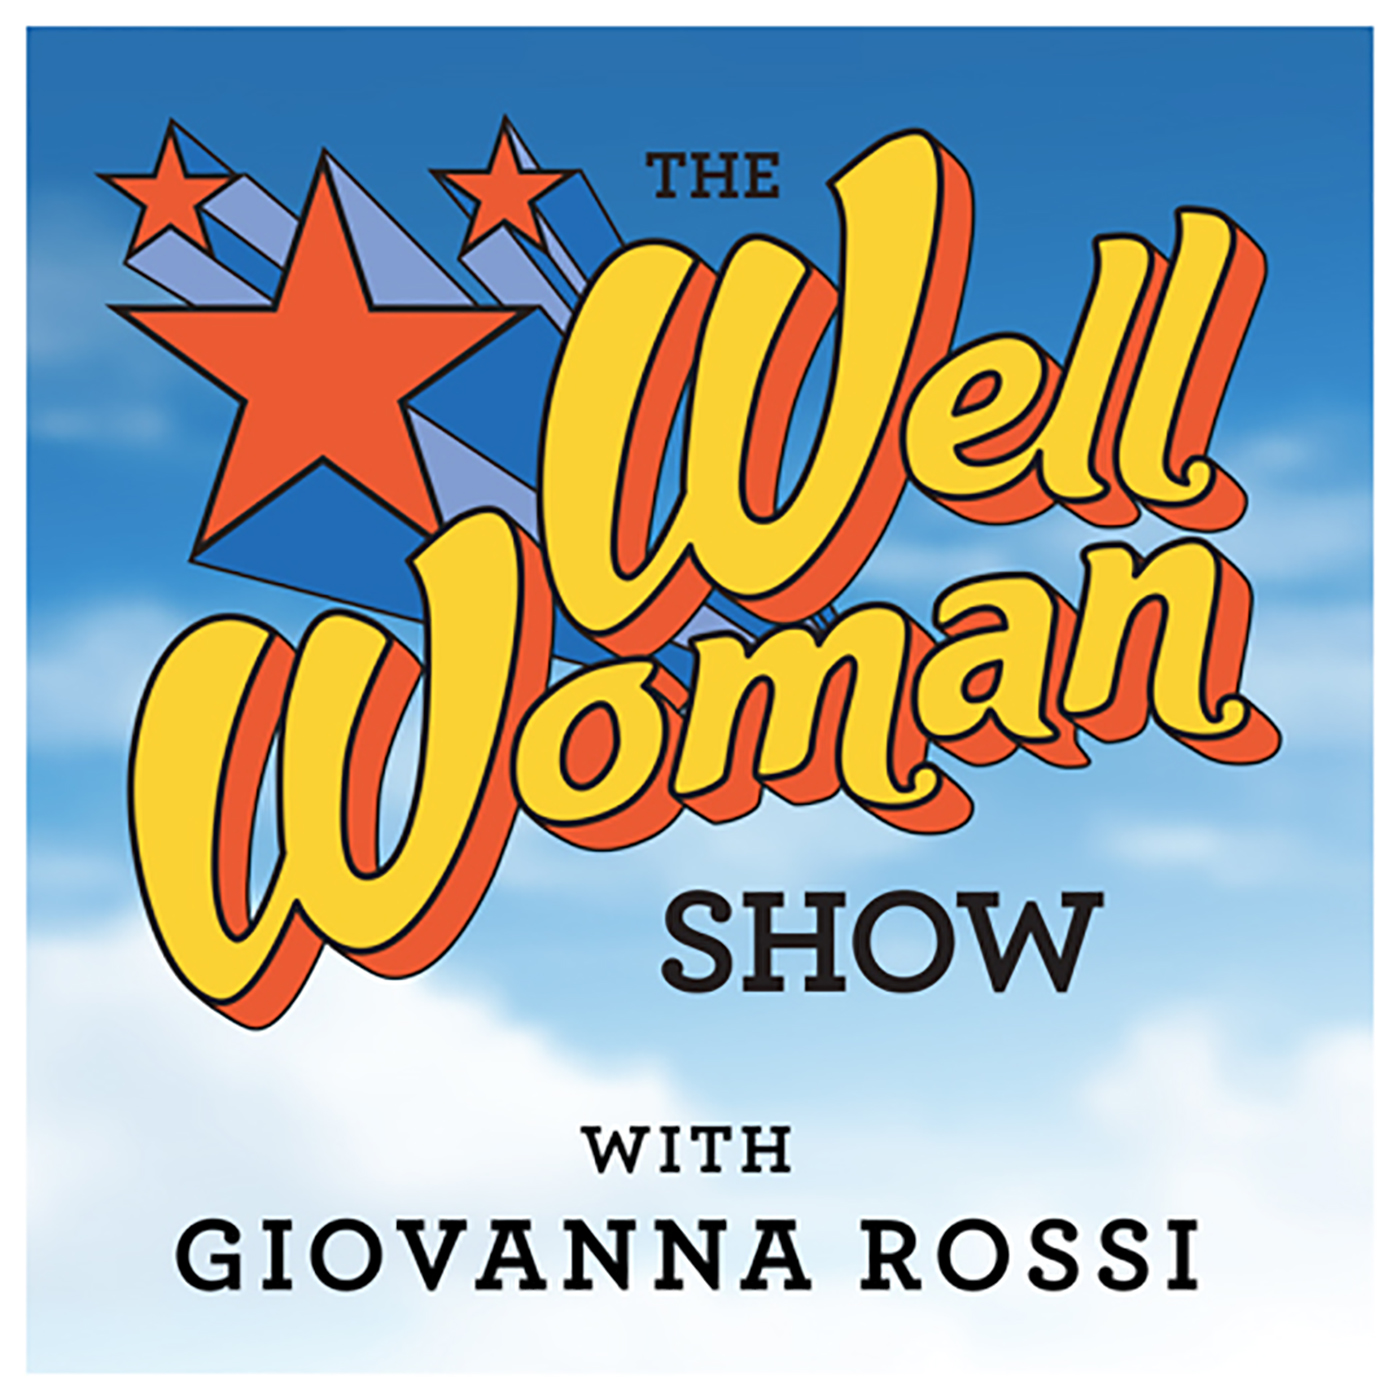 The Well Woman Show - 099 How to Develop Confidence, Courage and Character to be a Leader with Peggy Sanchez Mills